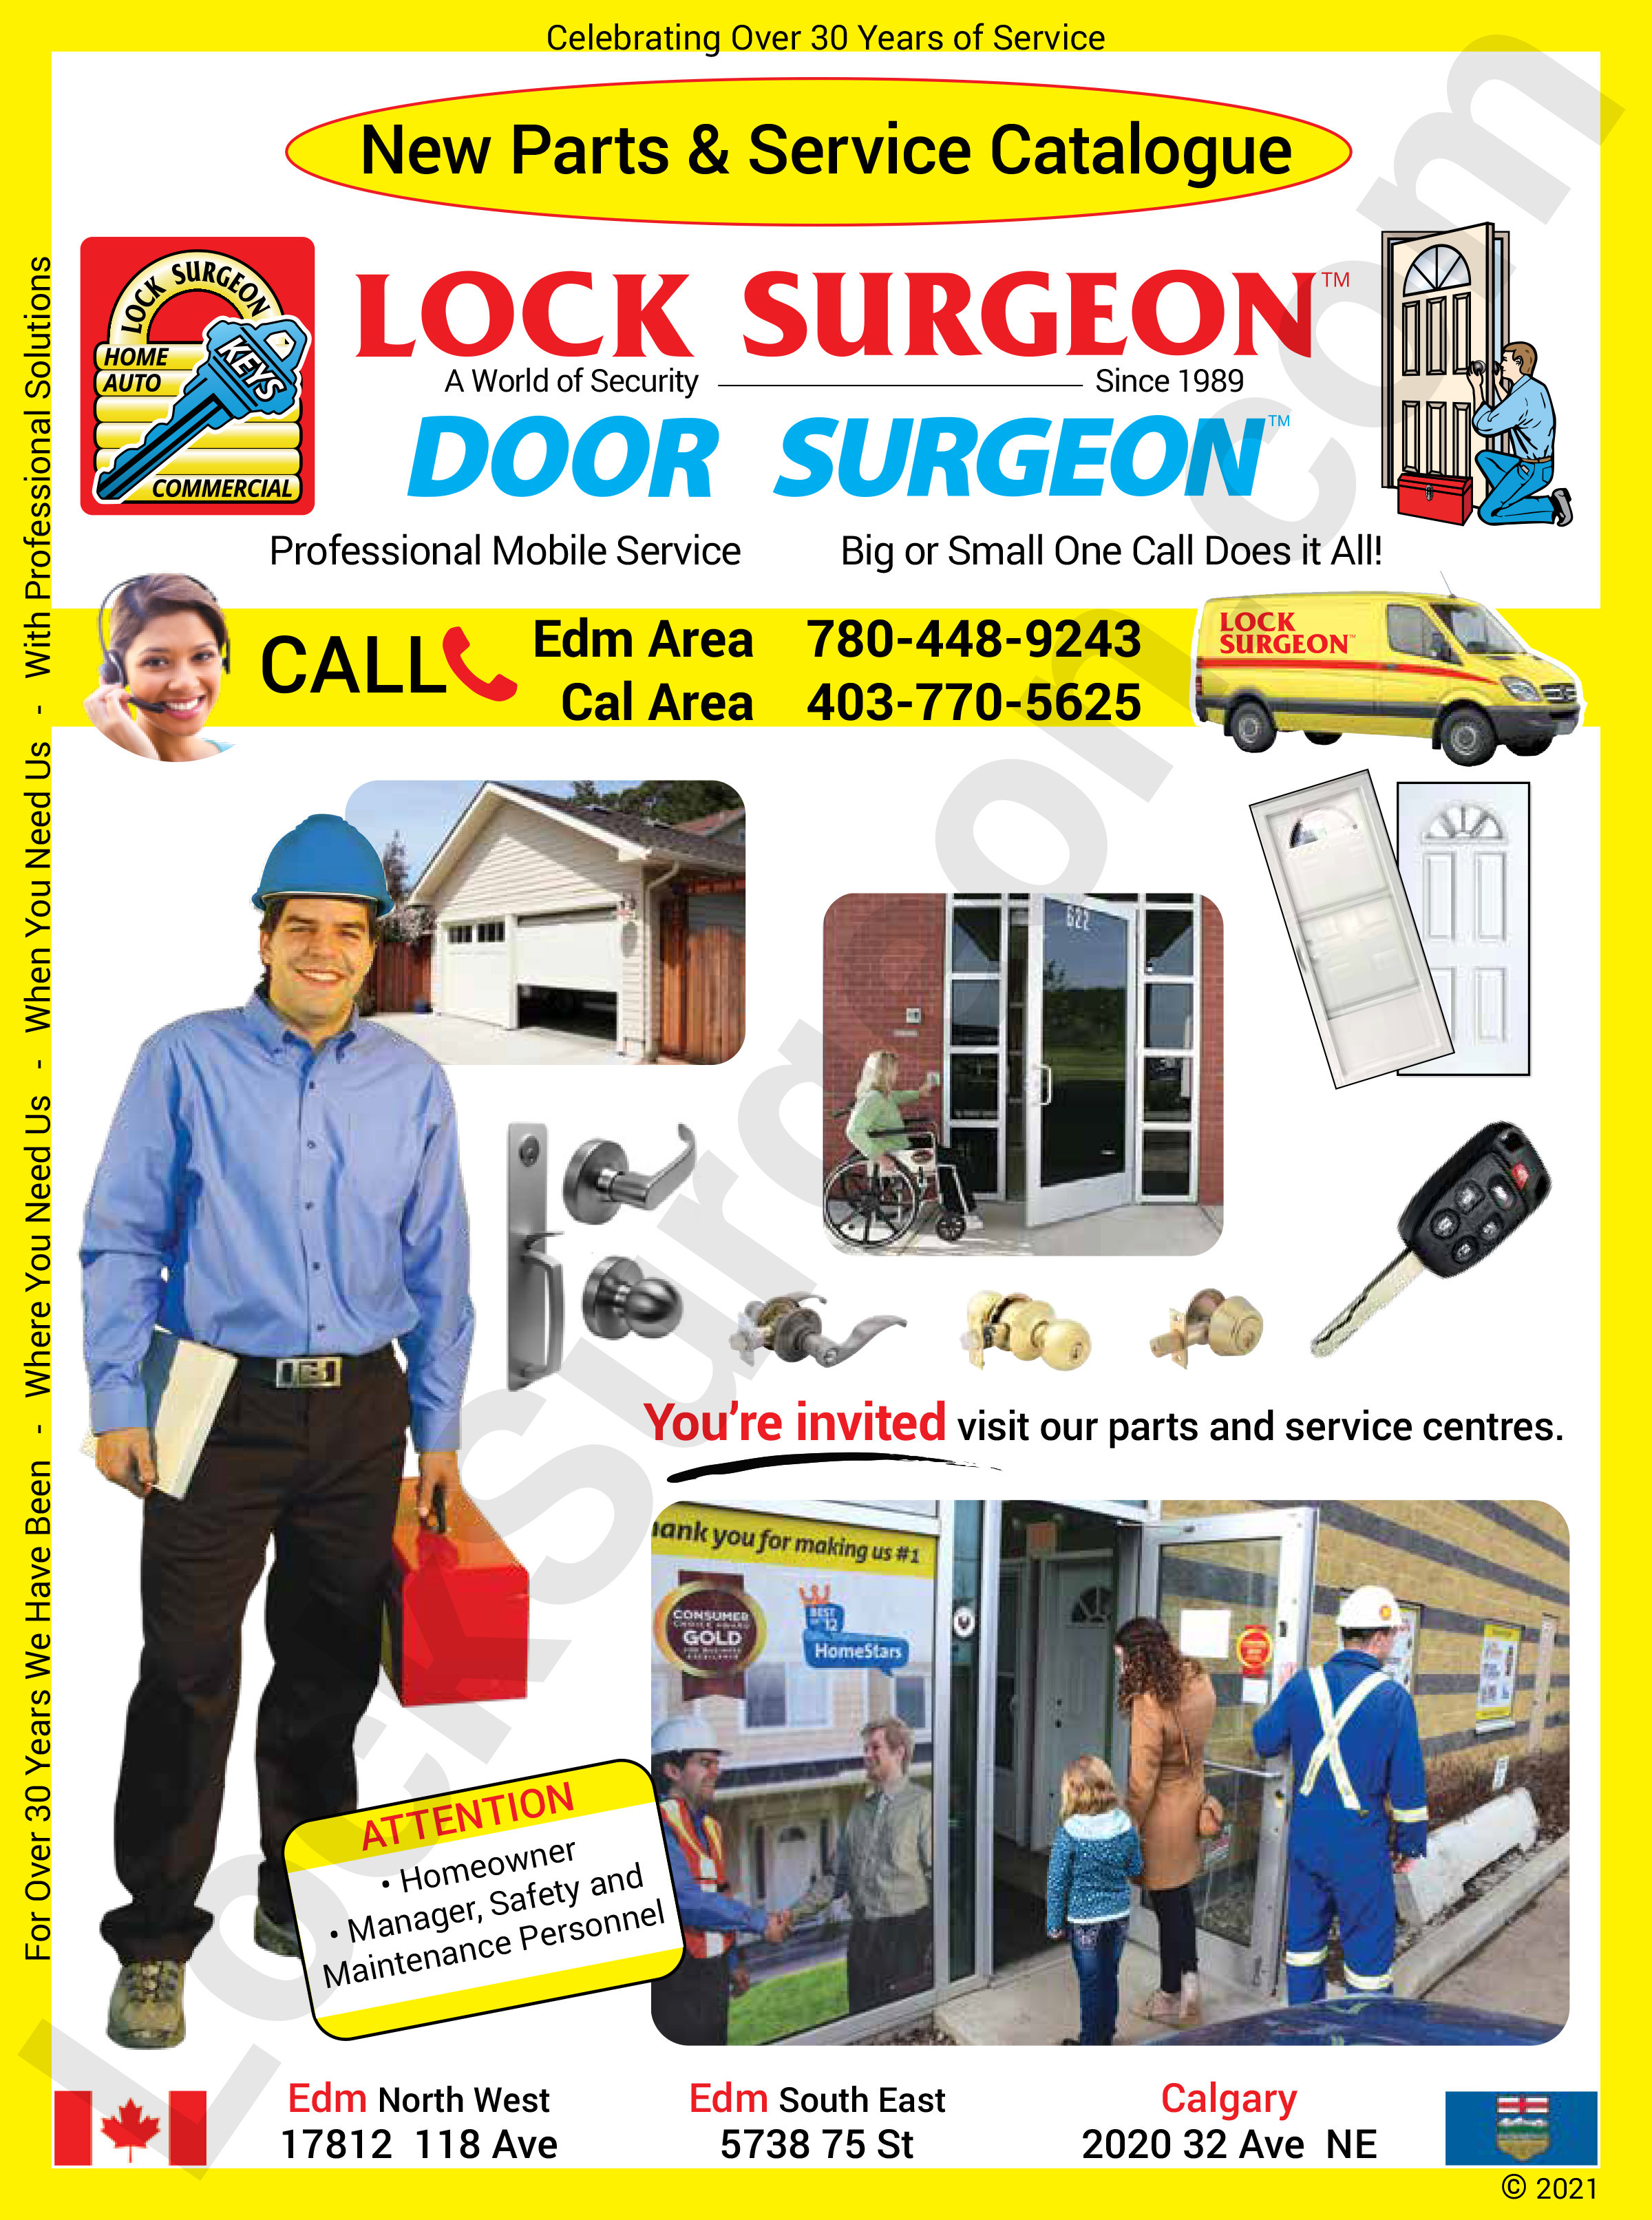 Home lock and door repair, Business Locks and Security Hardware, Commercial Key Systems.